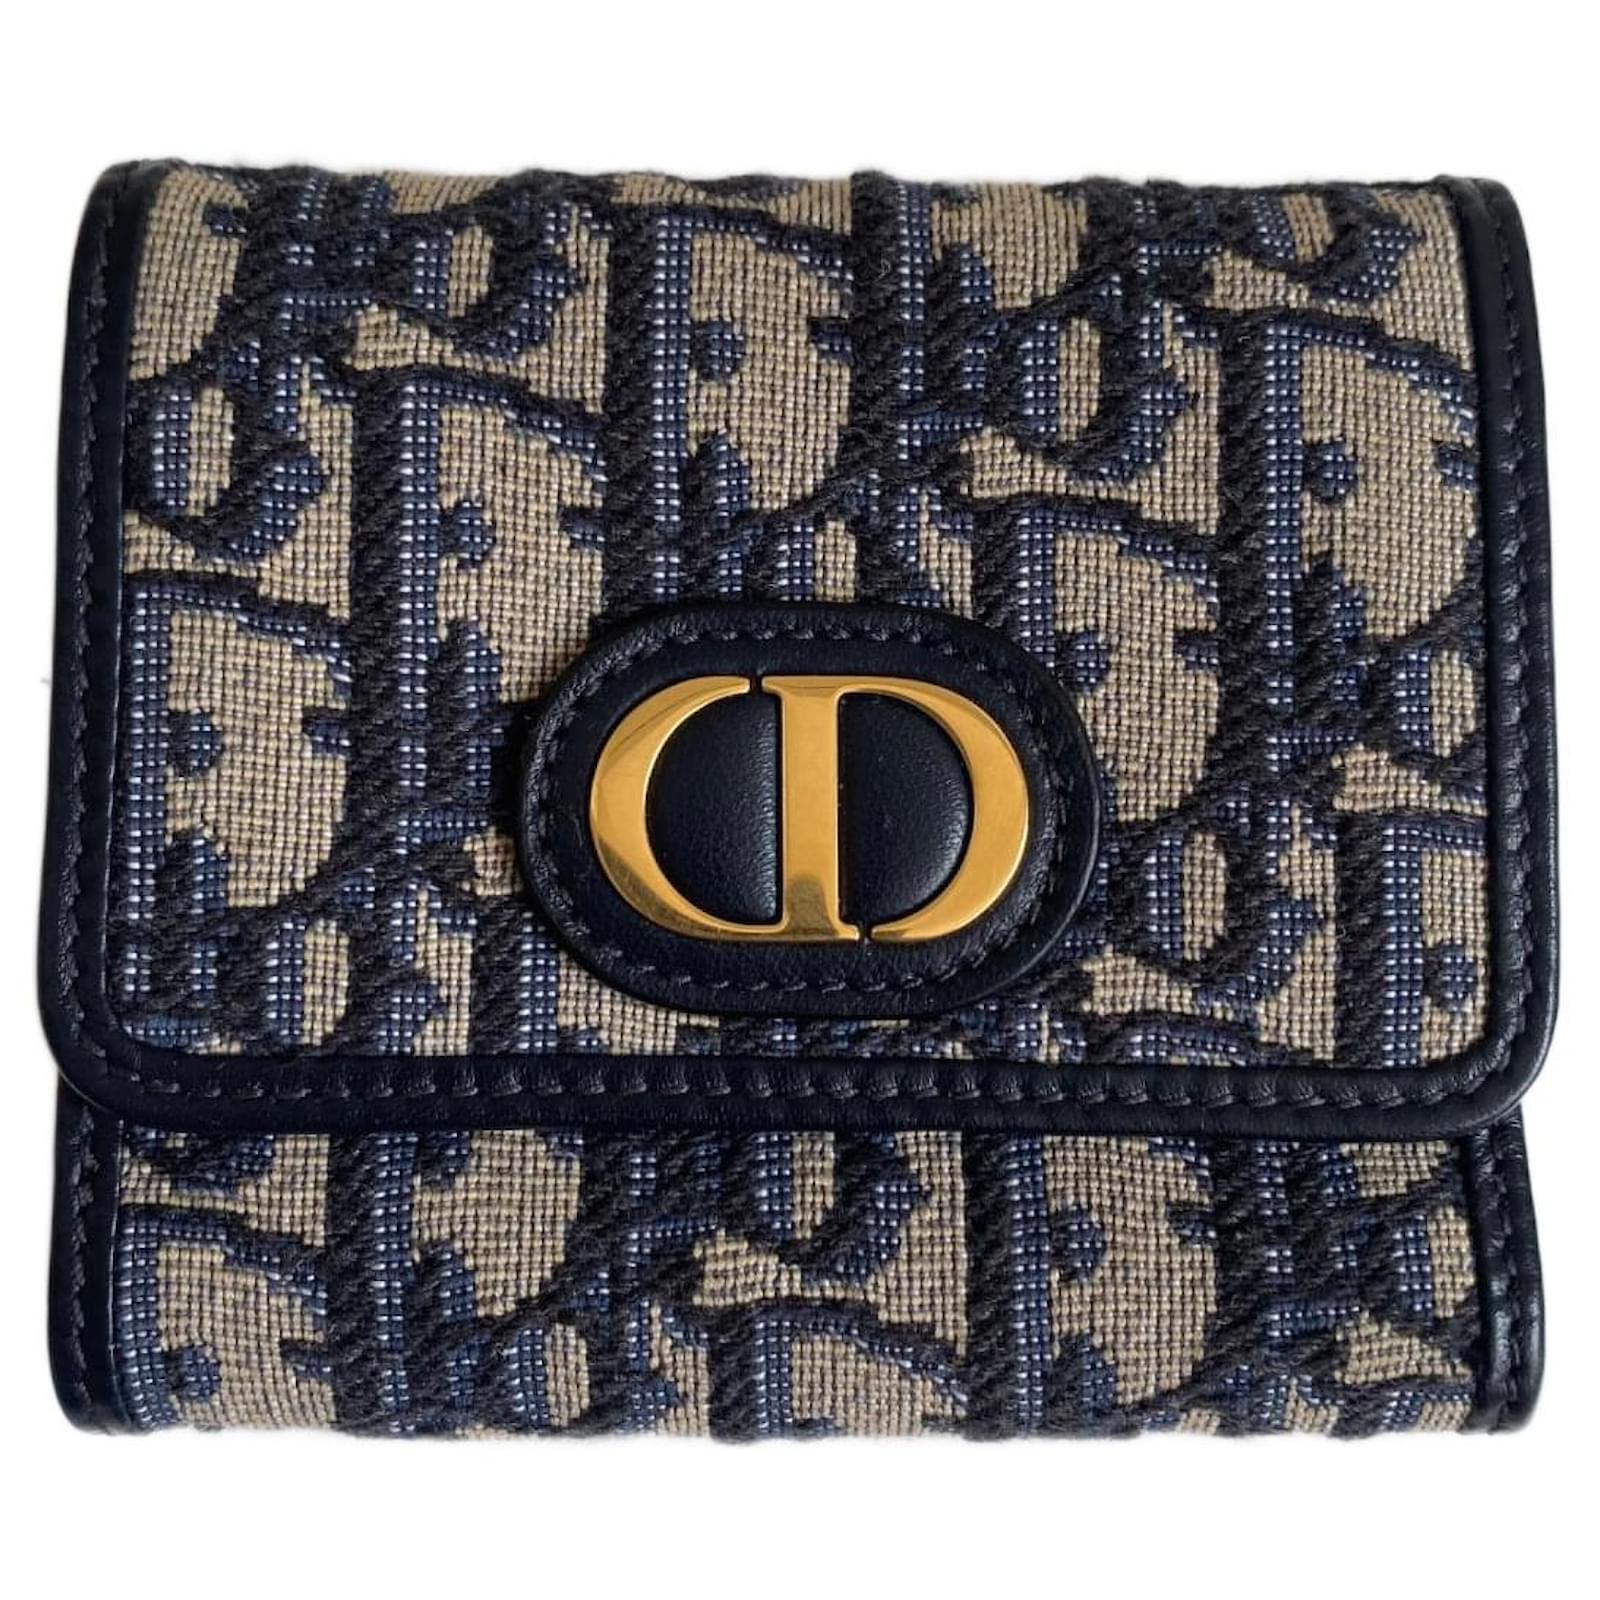 Dior Bags | New with Tags Dior 30 Montaigne Phone Holder Bag in Blue Oblique Jacquard | Color: Blue/Tan | Size: Os | Bybristolbay's Closet